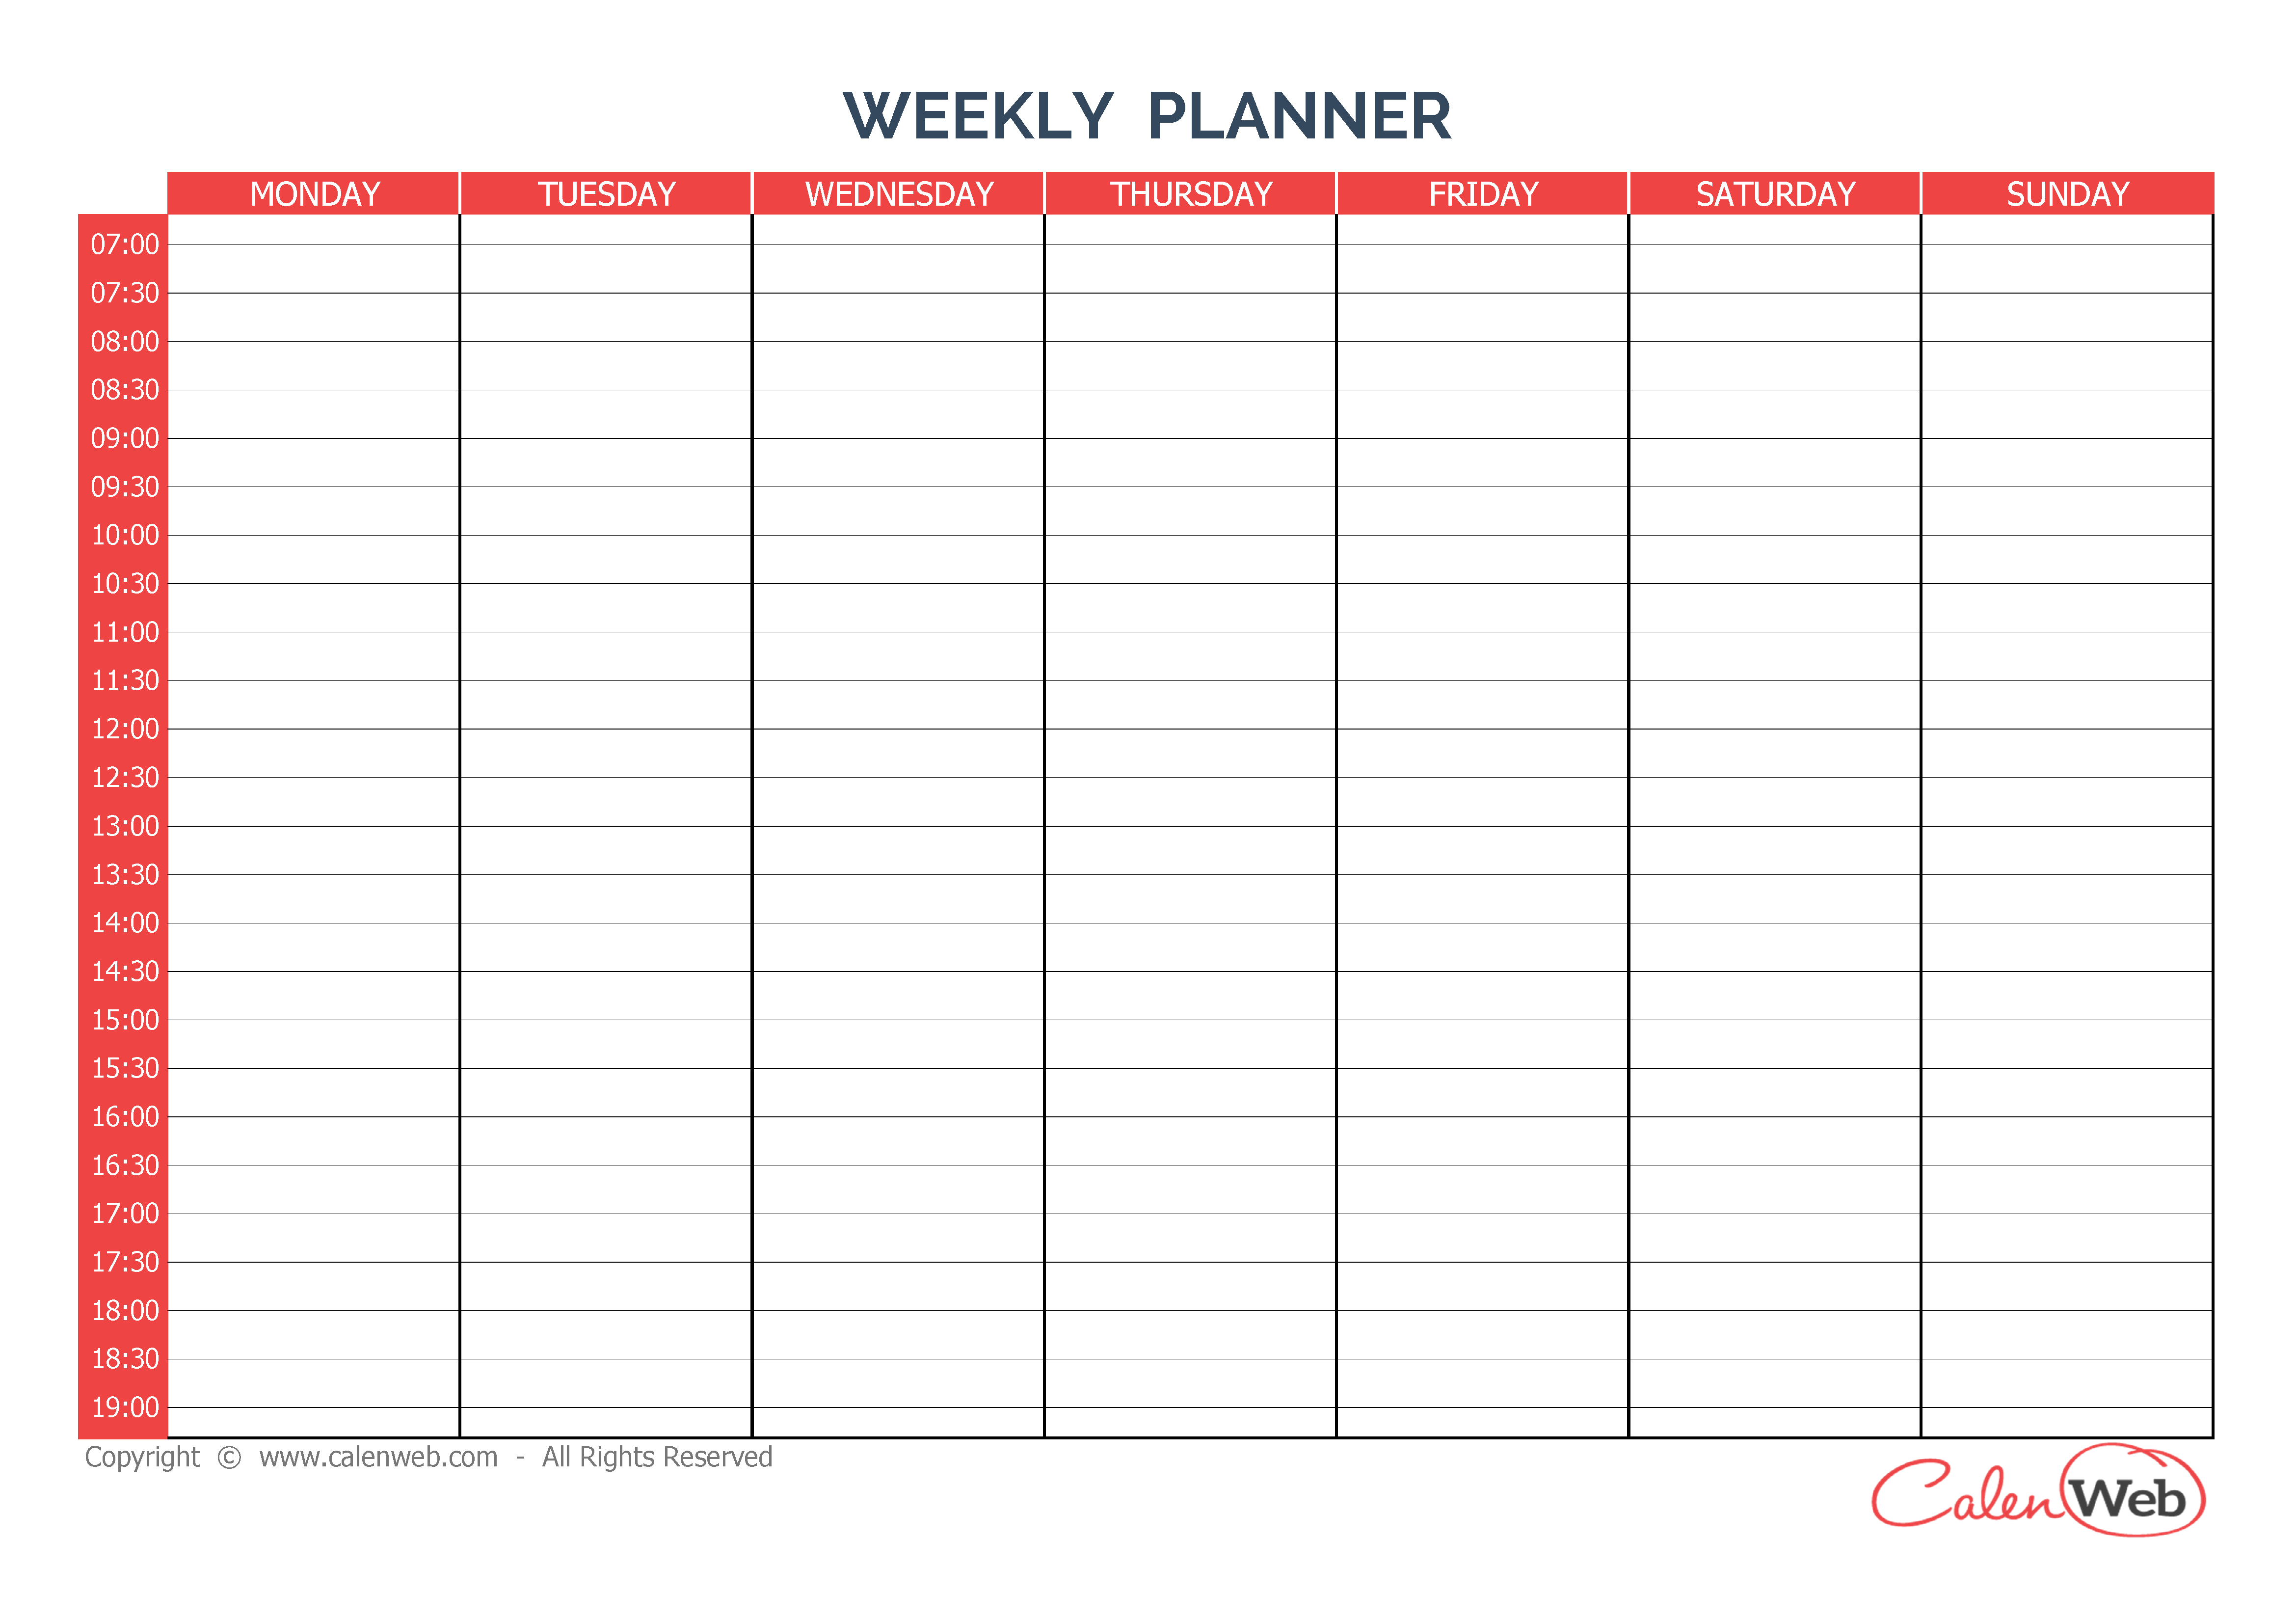 weekly-planner-7-days-first-day-monday-a-week-of-7-days-first-day